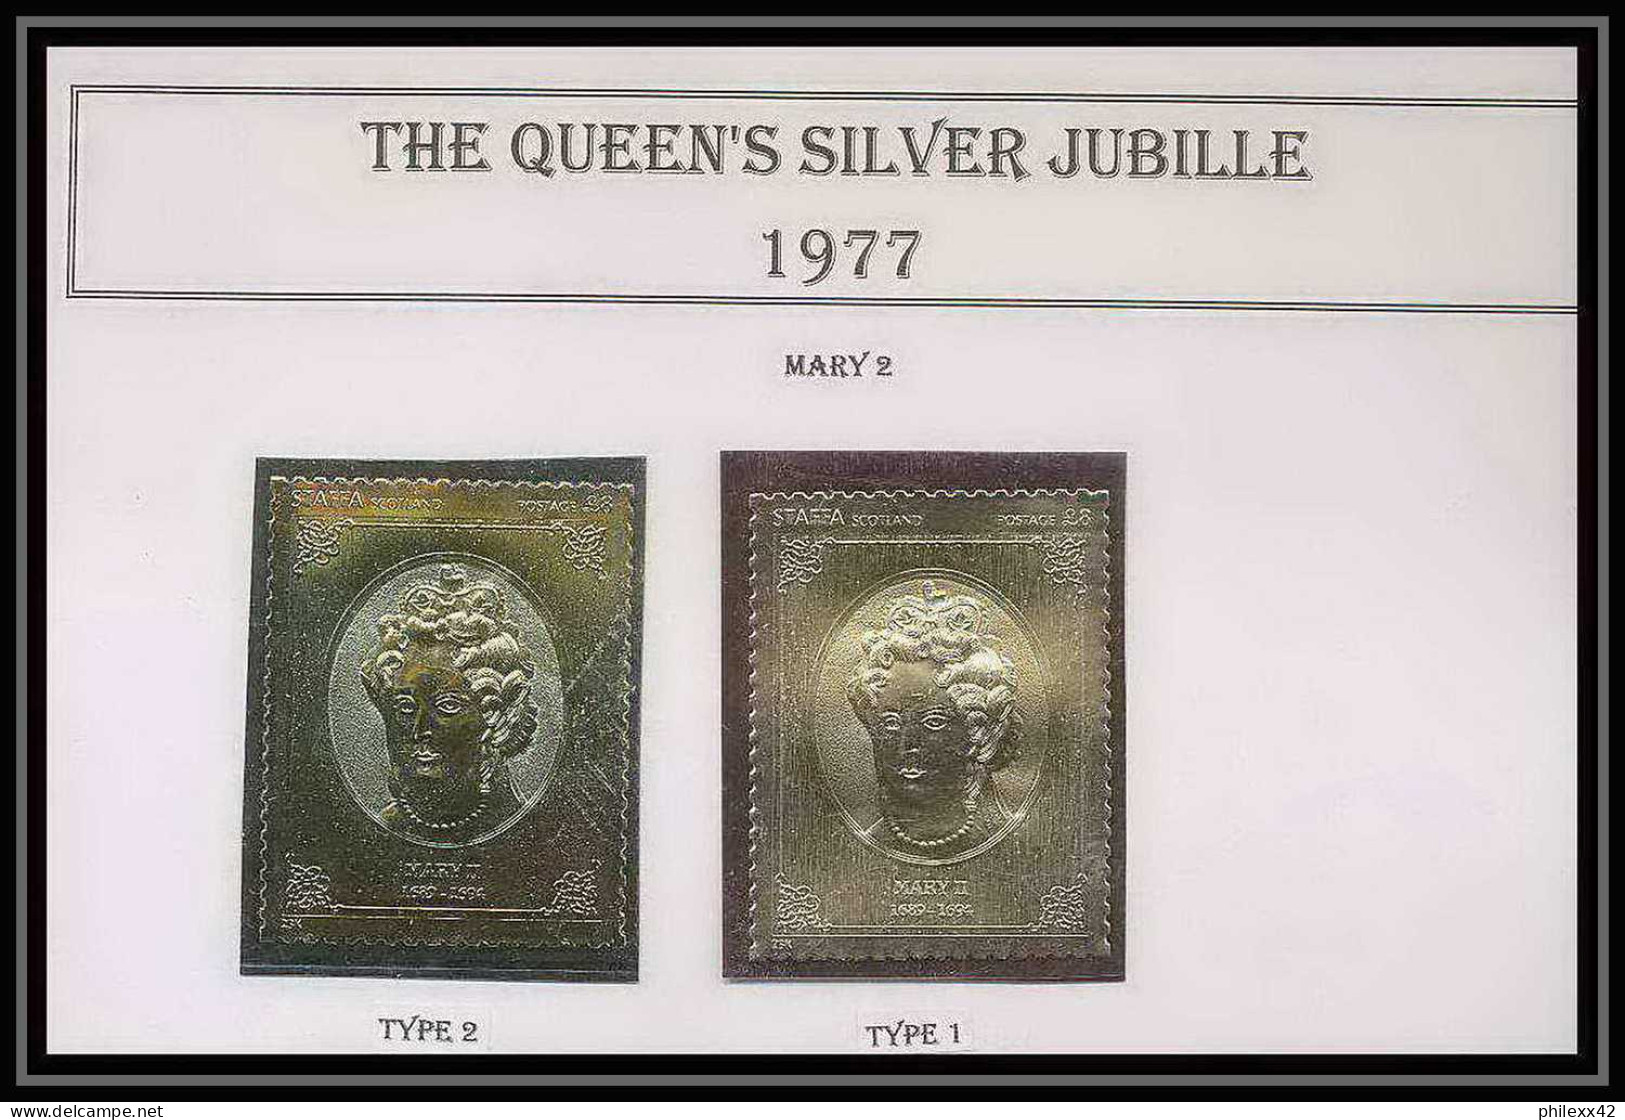 451 Staffa Scotland The Queen's Silver Jubilee 1977 OR Gold Stamps Monarchy United Kingdom Mary 2 Type 1&2 Neuf** Mnh - Escocia